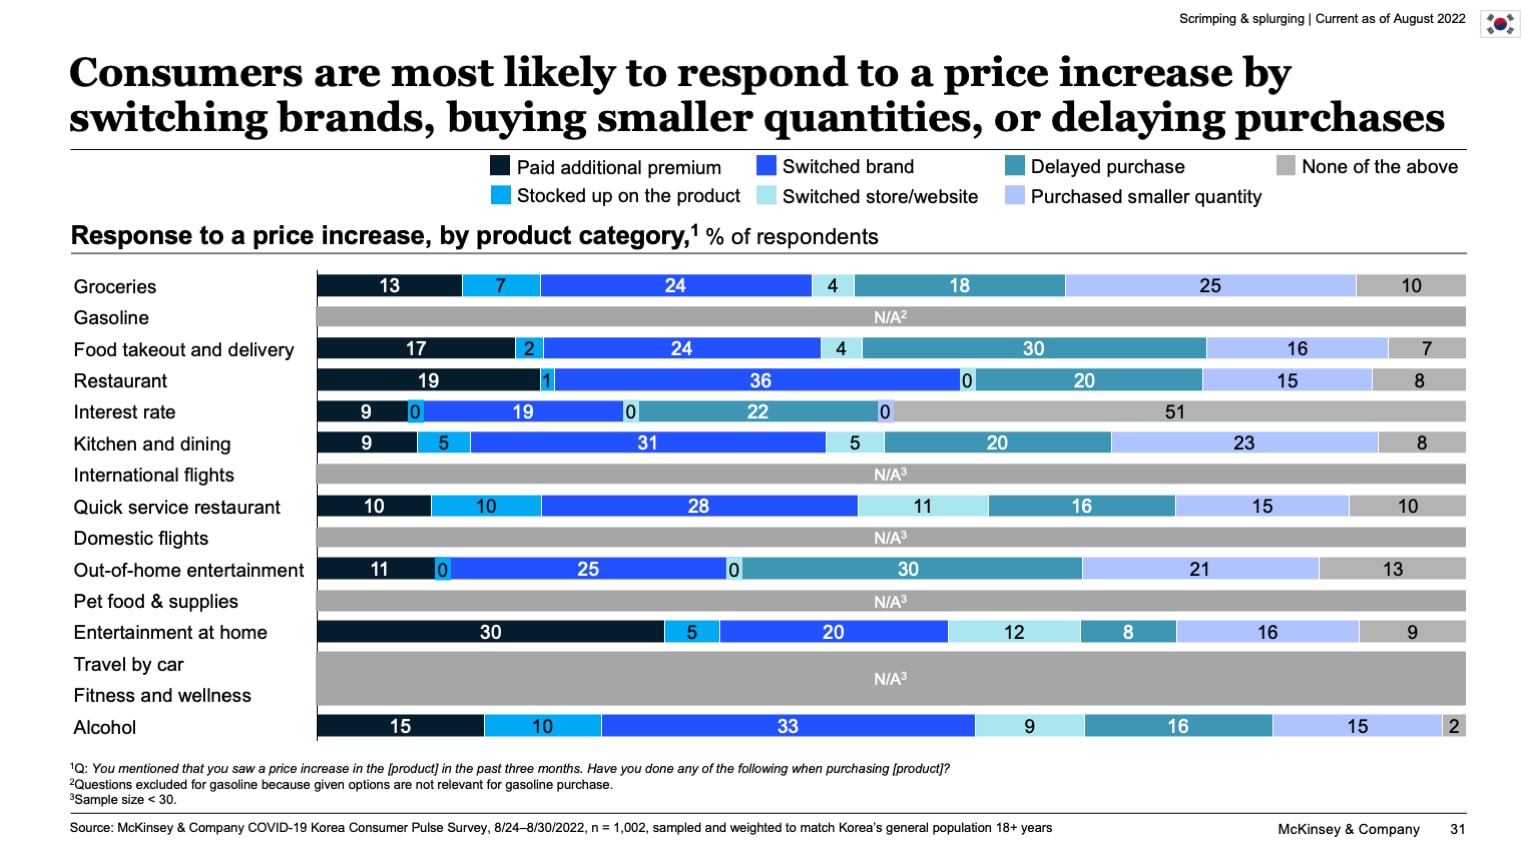 Consumers are most likely to respond to a price increase by switching brands, buying smaller quantities, or delaying purchases